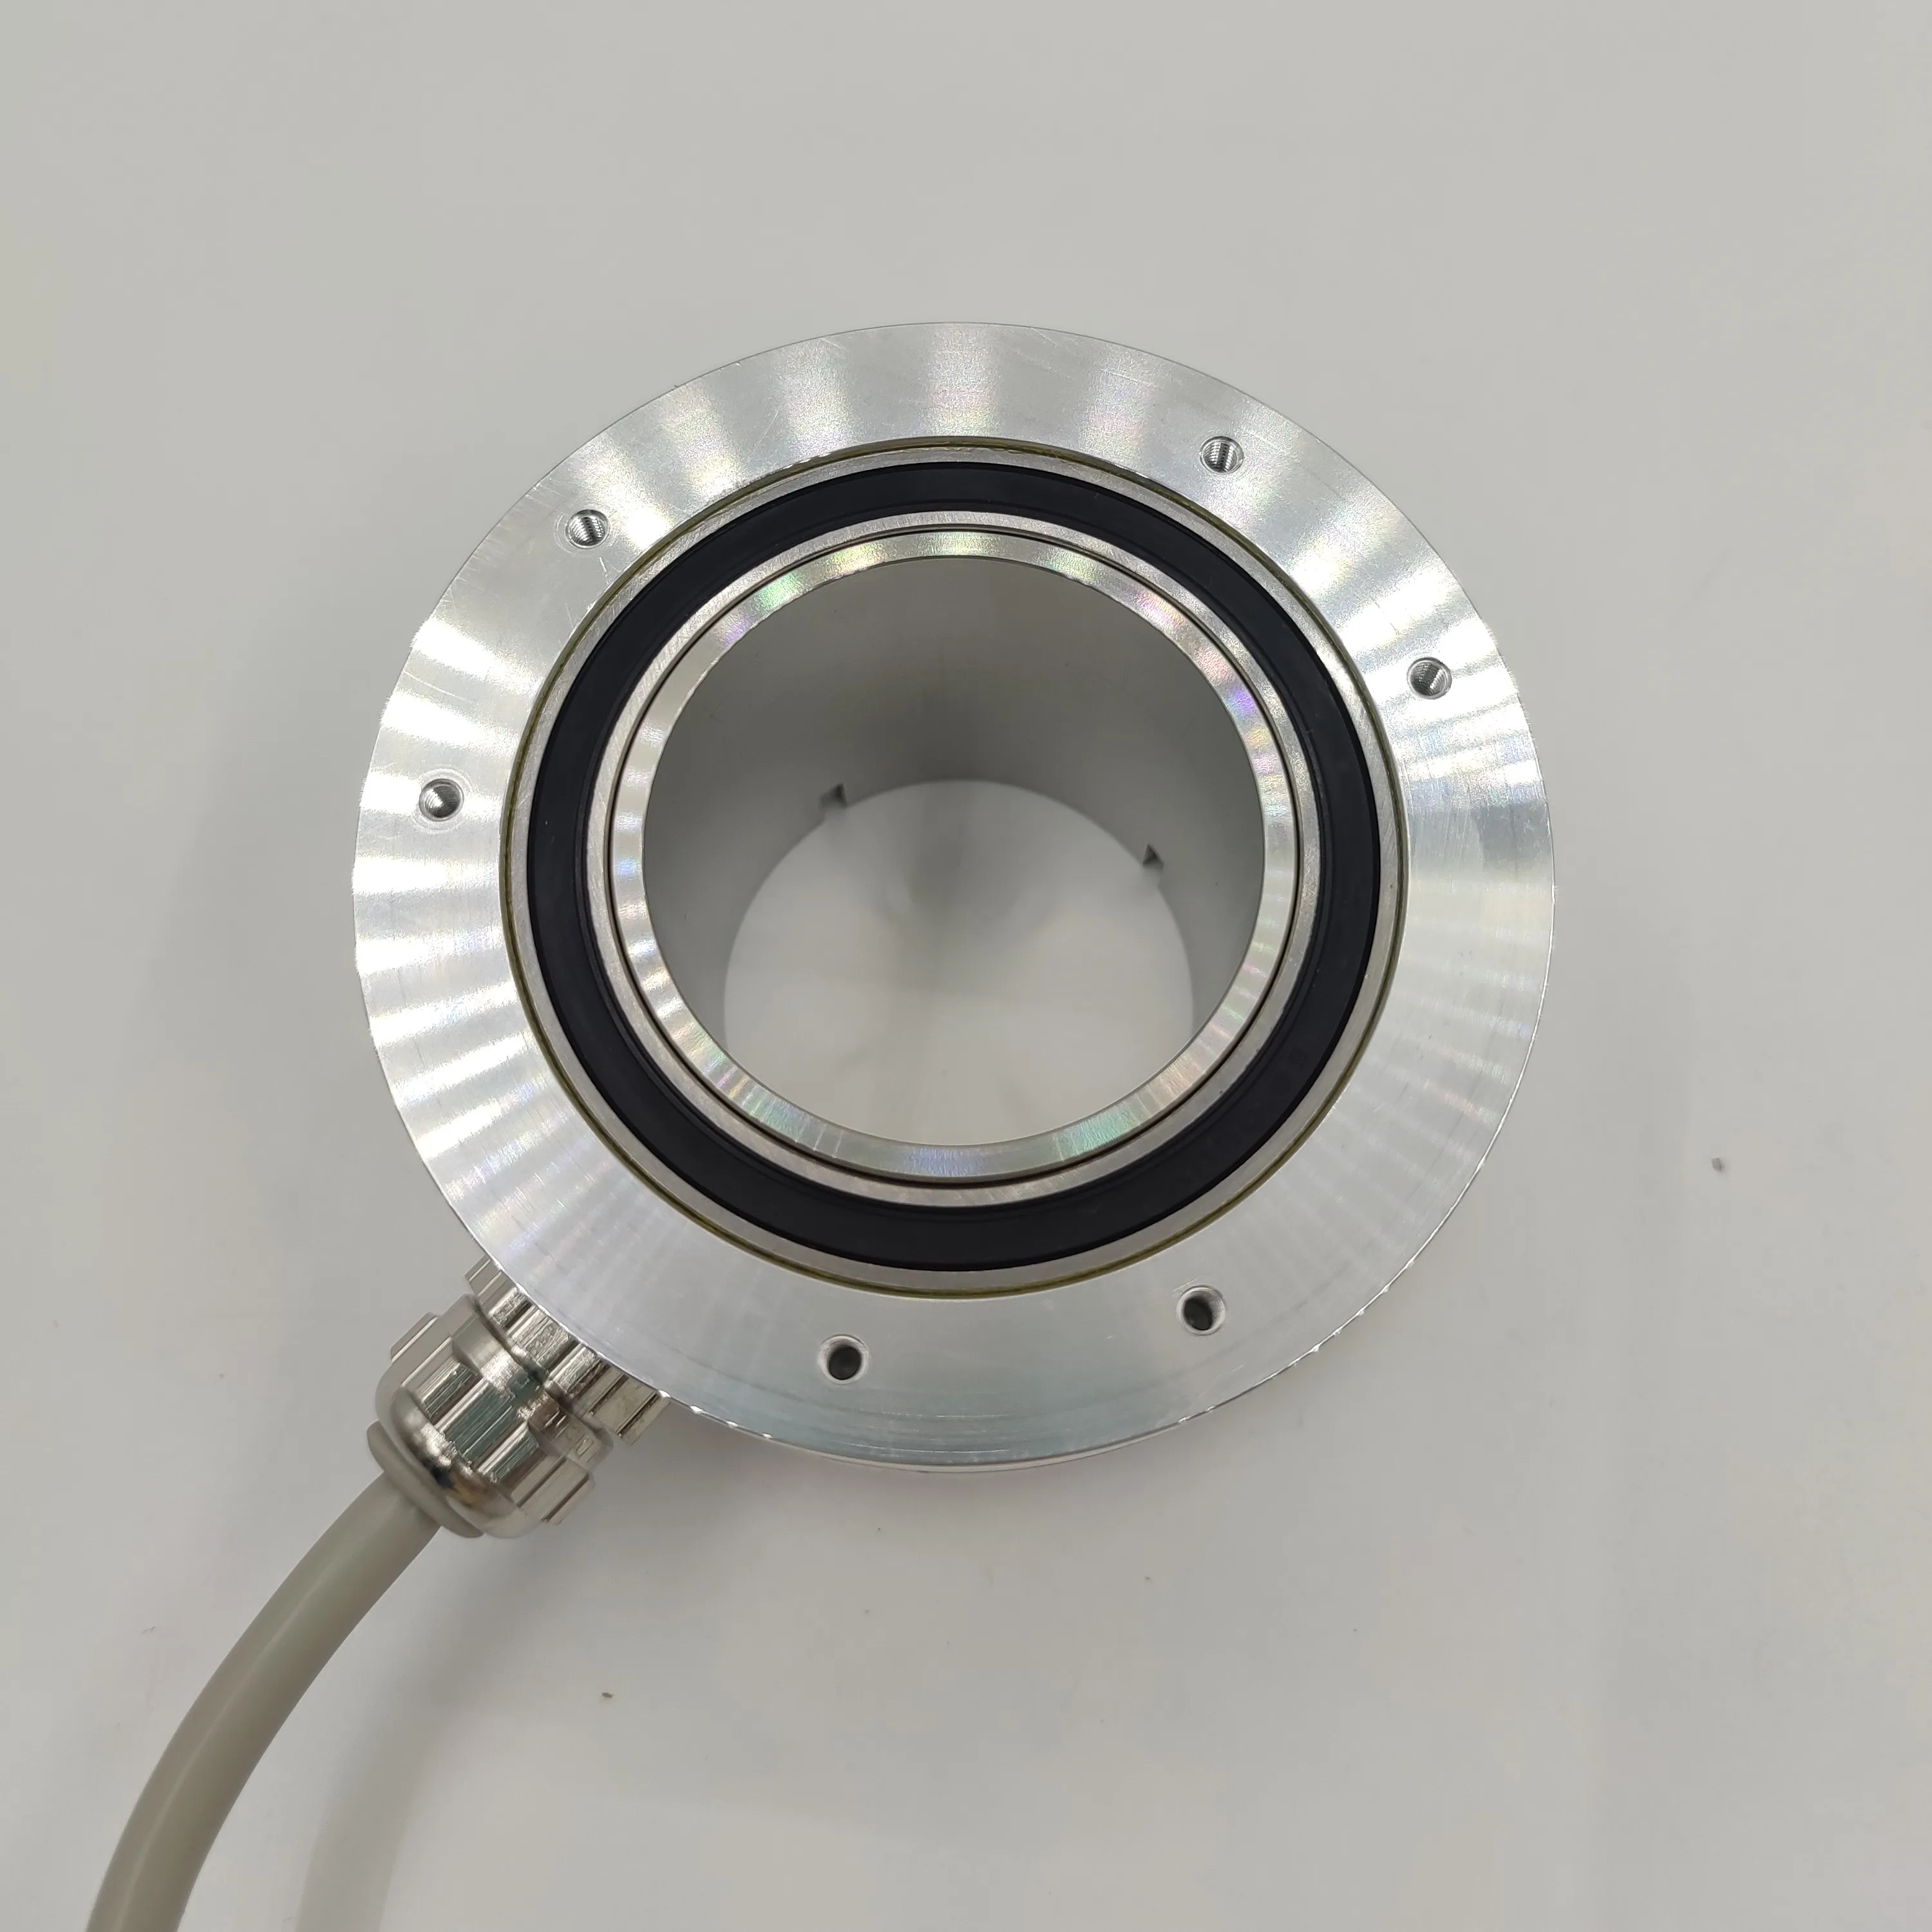 

ENI58IL-S10CA5-1024UD1-RC1 P+F encoder Solid shaft rotary encoder New original genuine goods are available from stock